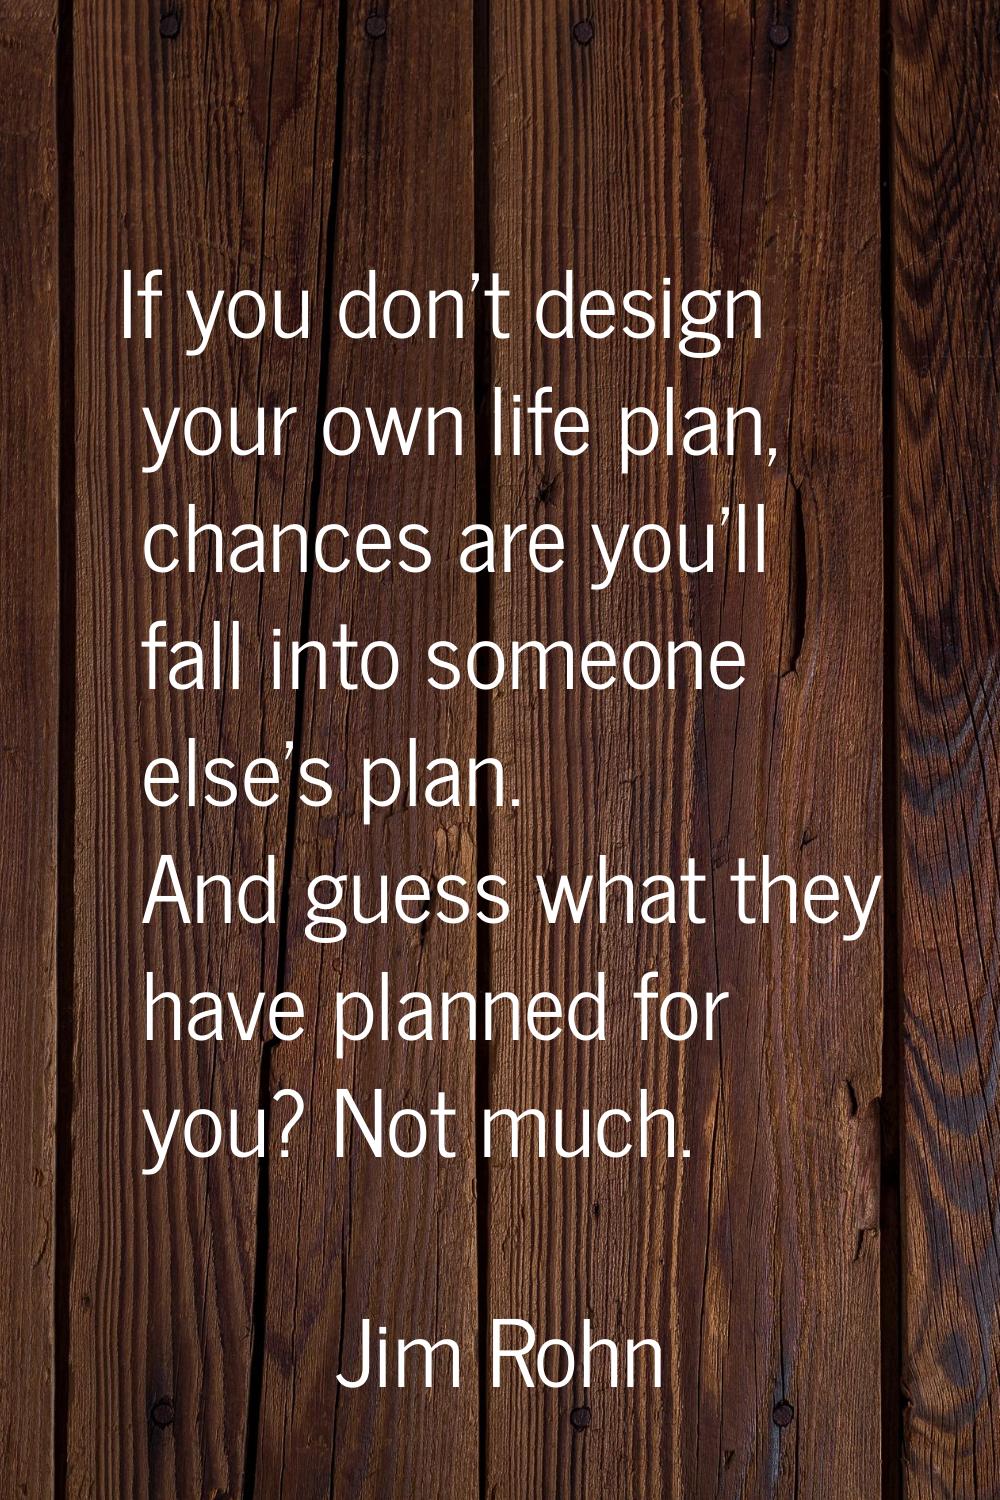 If you don't design your own life plan, chances are you'll fall into someone else's plan. And guess